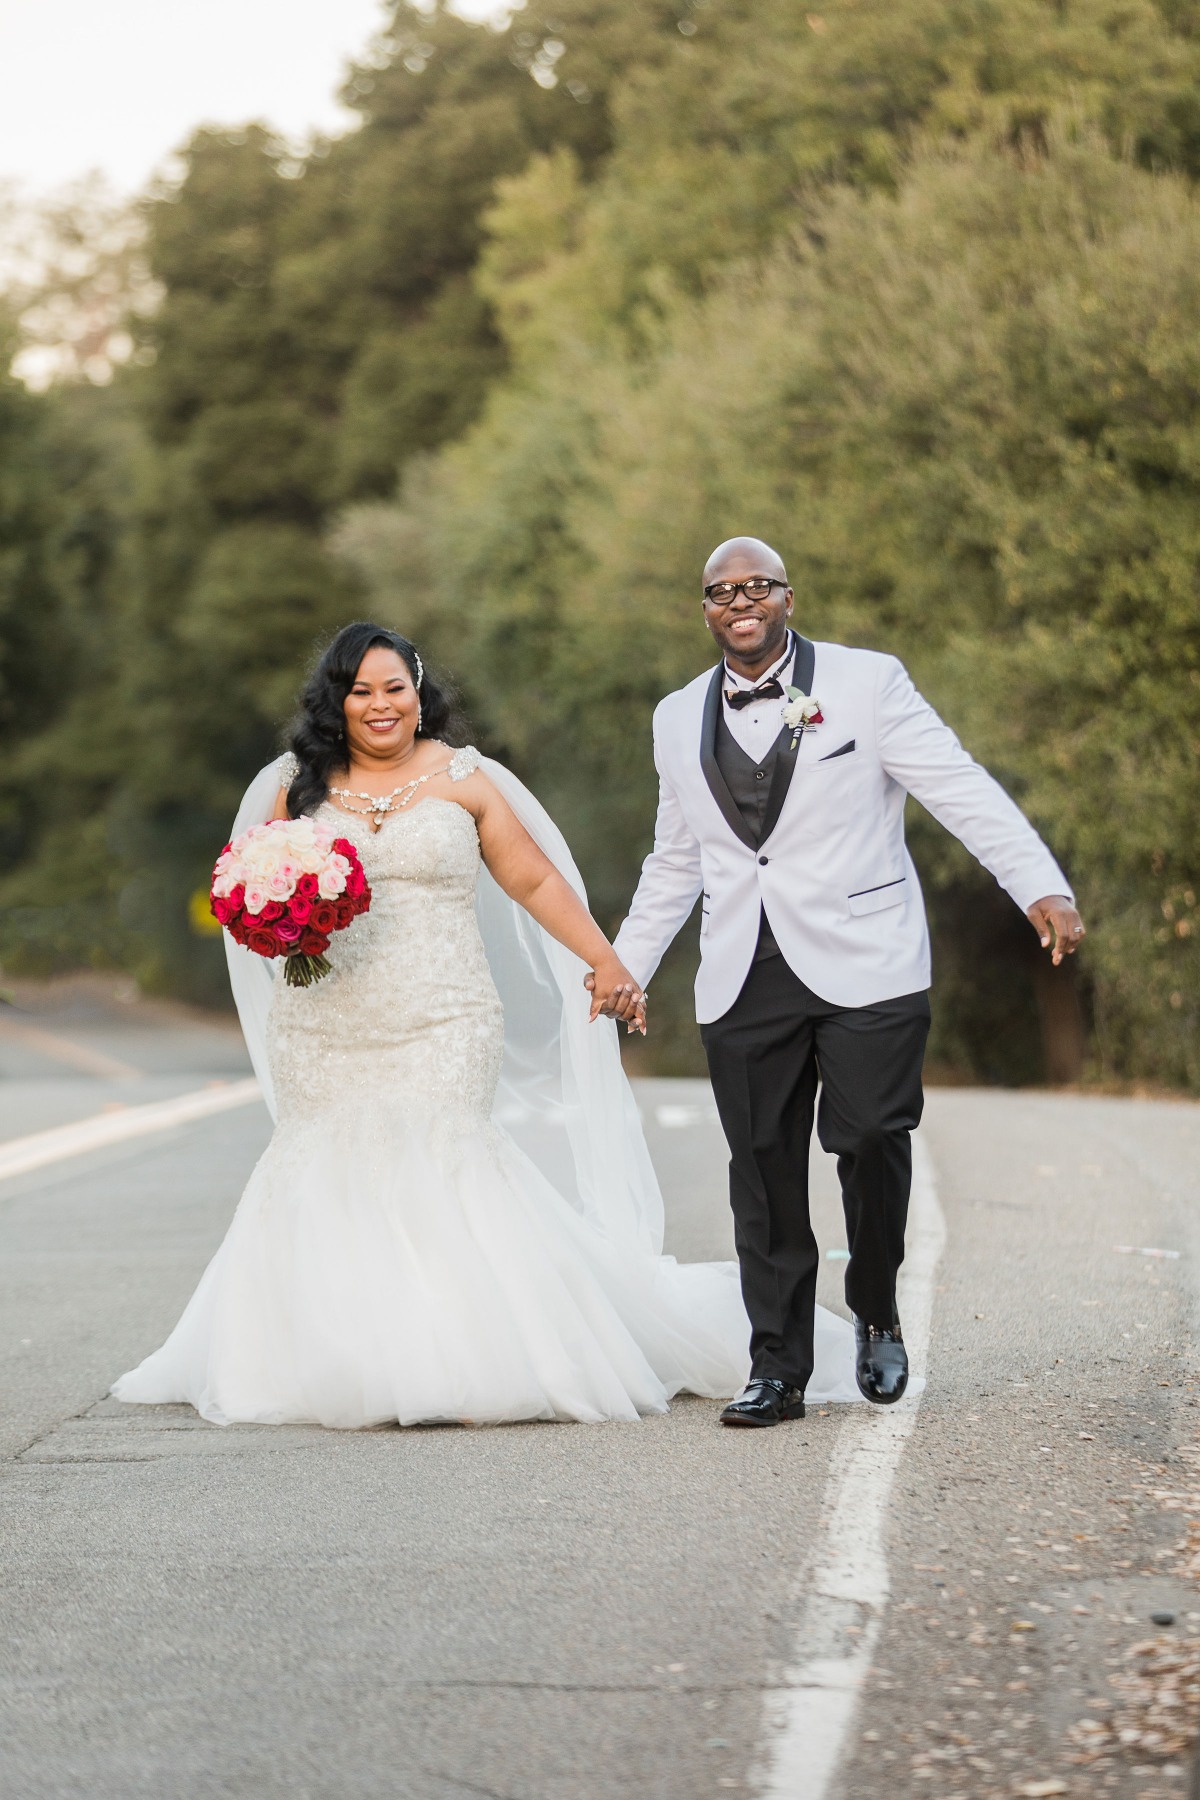 Hollywood Glam Wedding at Sunol's Casa Bella with Pops of Red and Black